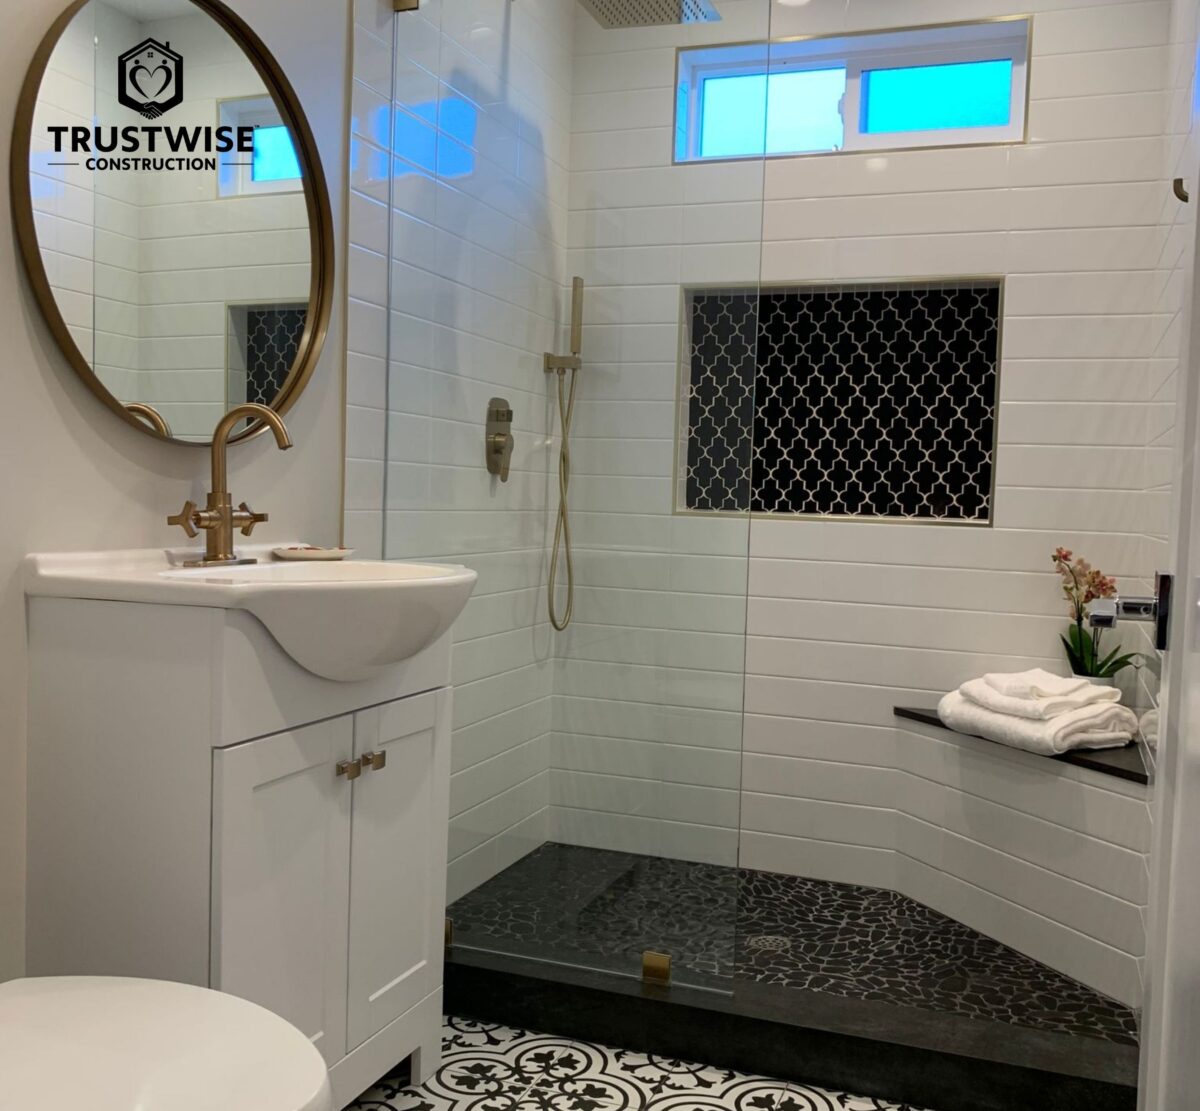 Revitalize your bathroom with our premier remodeling services. From sleek modern designs to timeless classics, let us bring your vision to life.